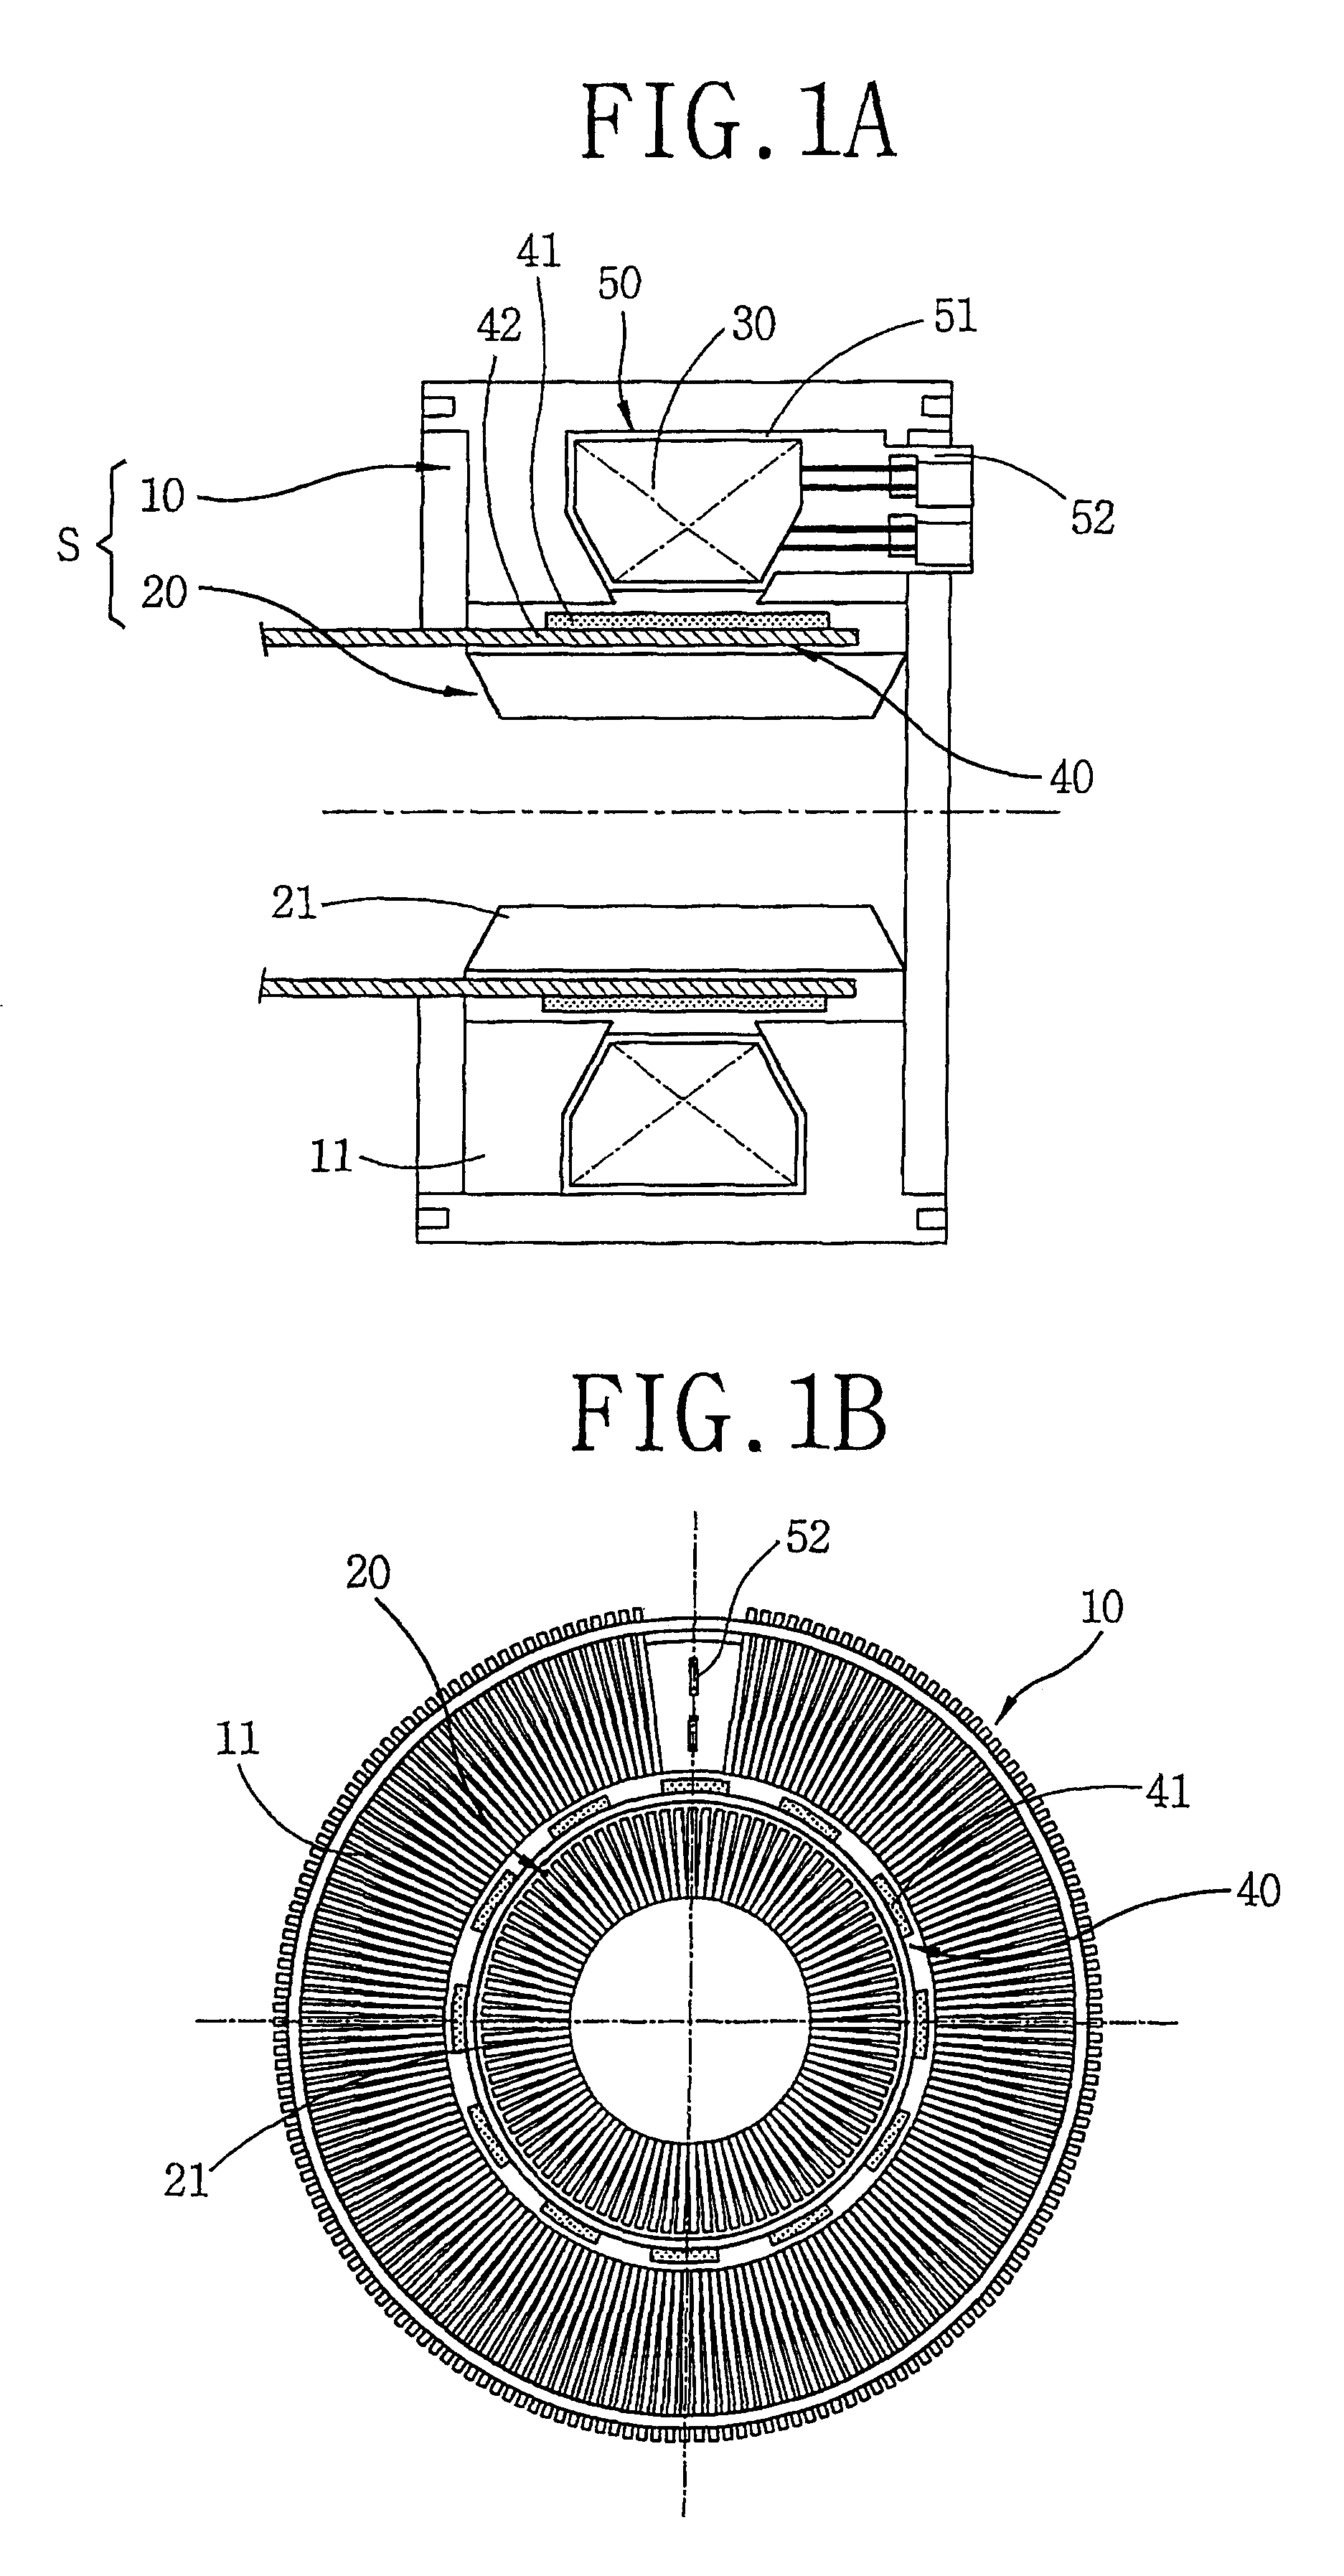 Structure for stator of reciprocating motor